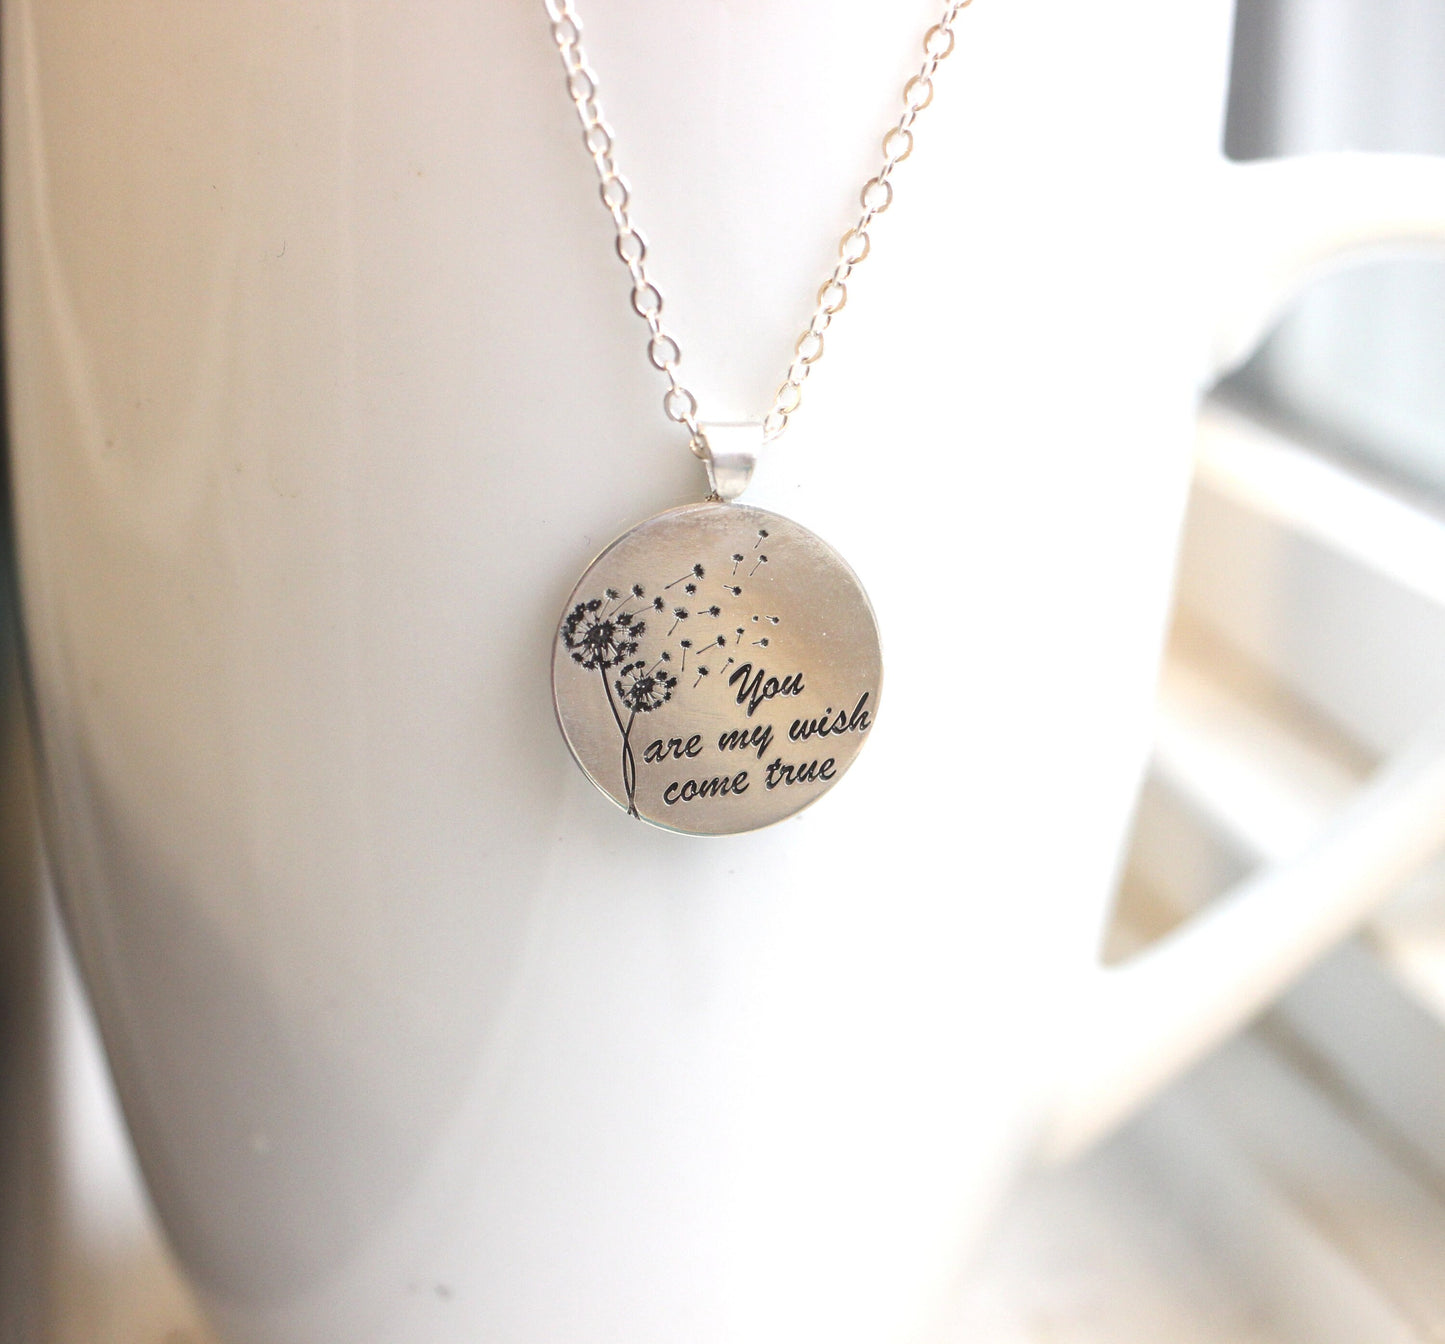 Dandelion Necklace // Personalized Sterling Silver Necklace - Custom Engraved Wish Necklace Valentine's Day Gift - You Are My Wish Come True